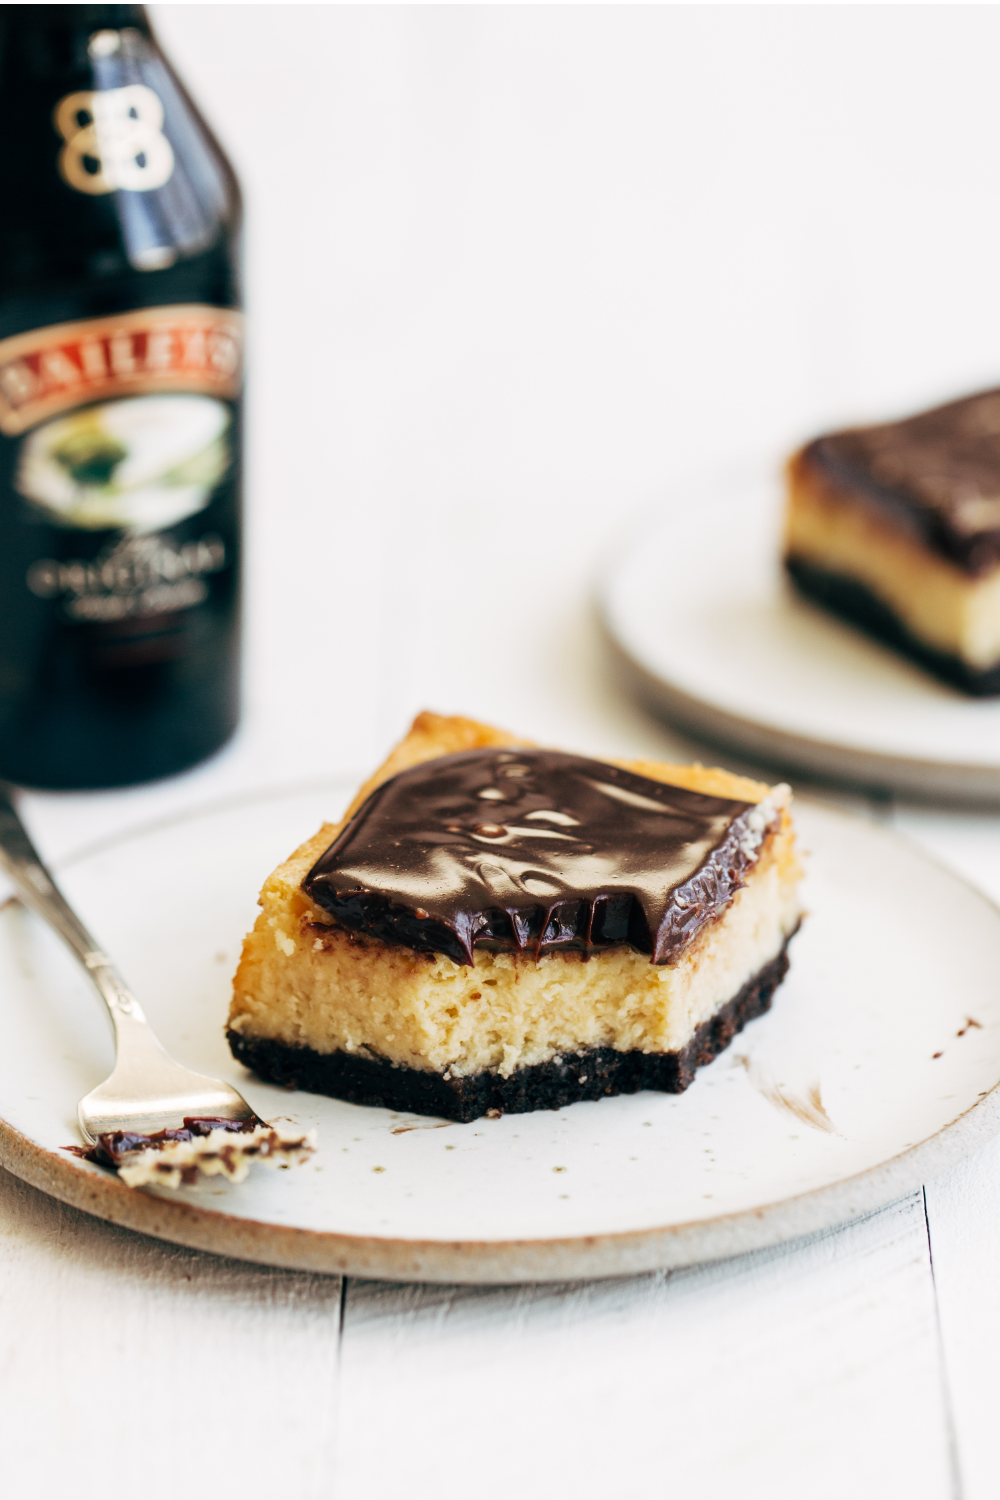 a bottle of Bailey's Irish Cream behind a couple slices of cheesecake bars on plates, ready to serve.